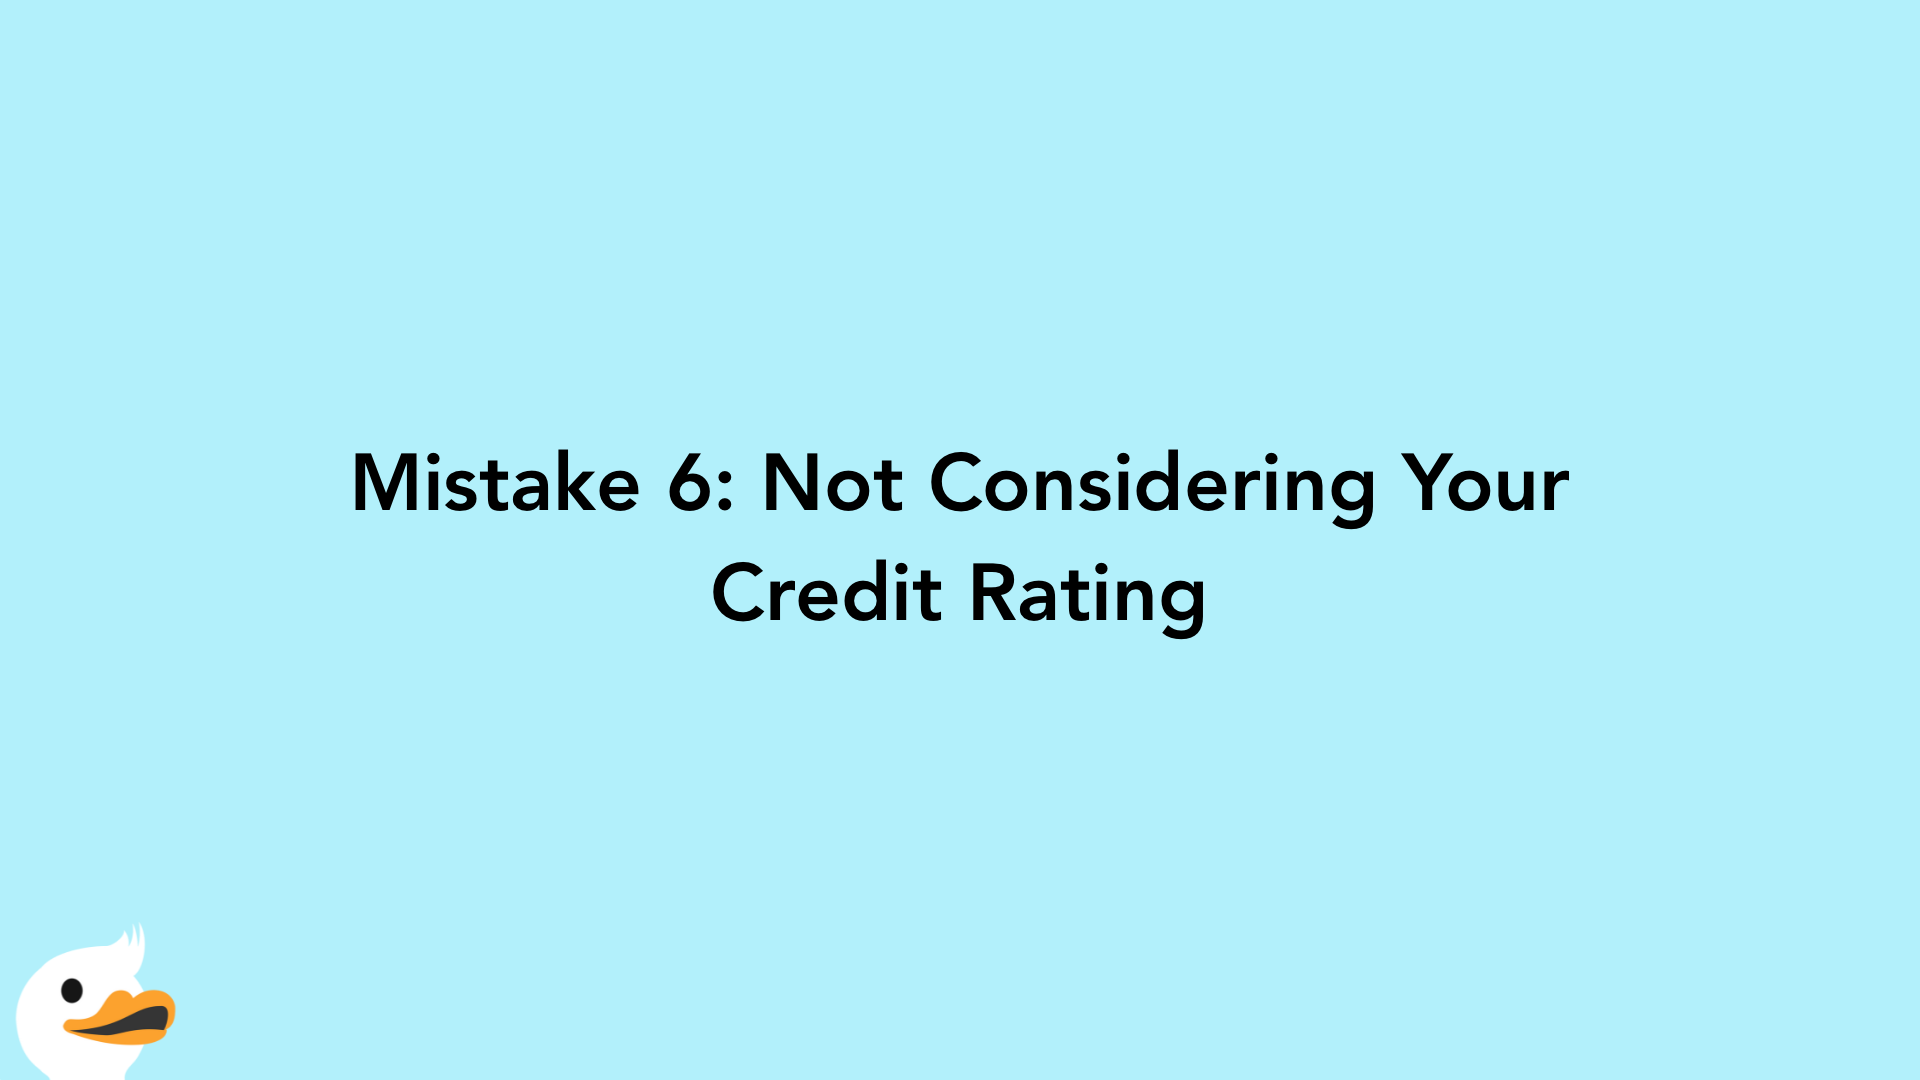 Mistake 6: Not Considering Your Credit Rating